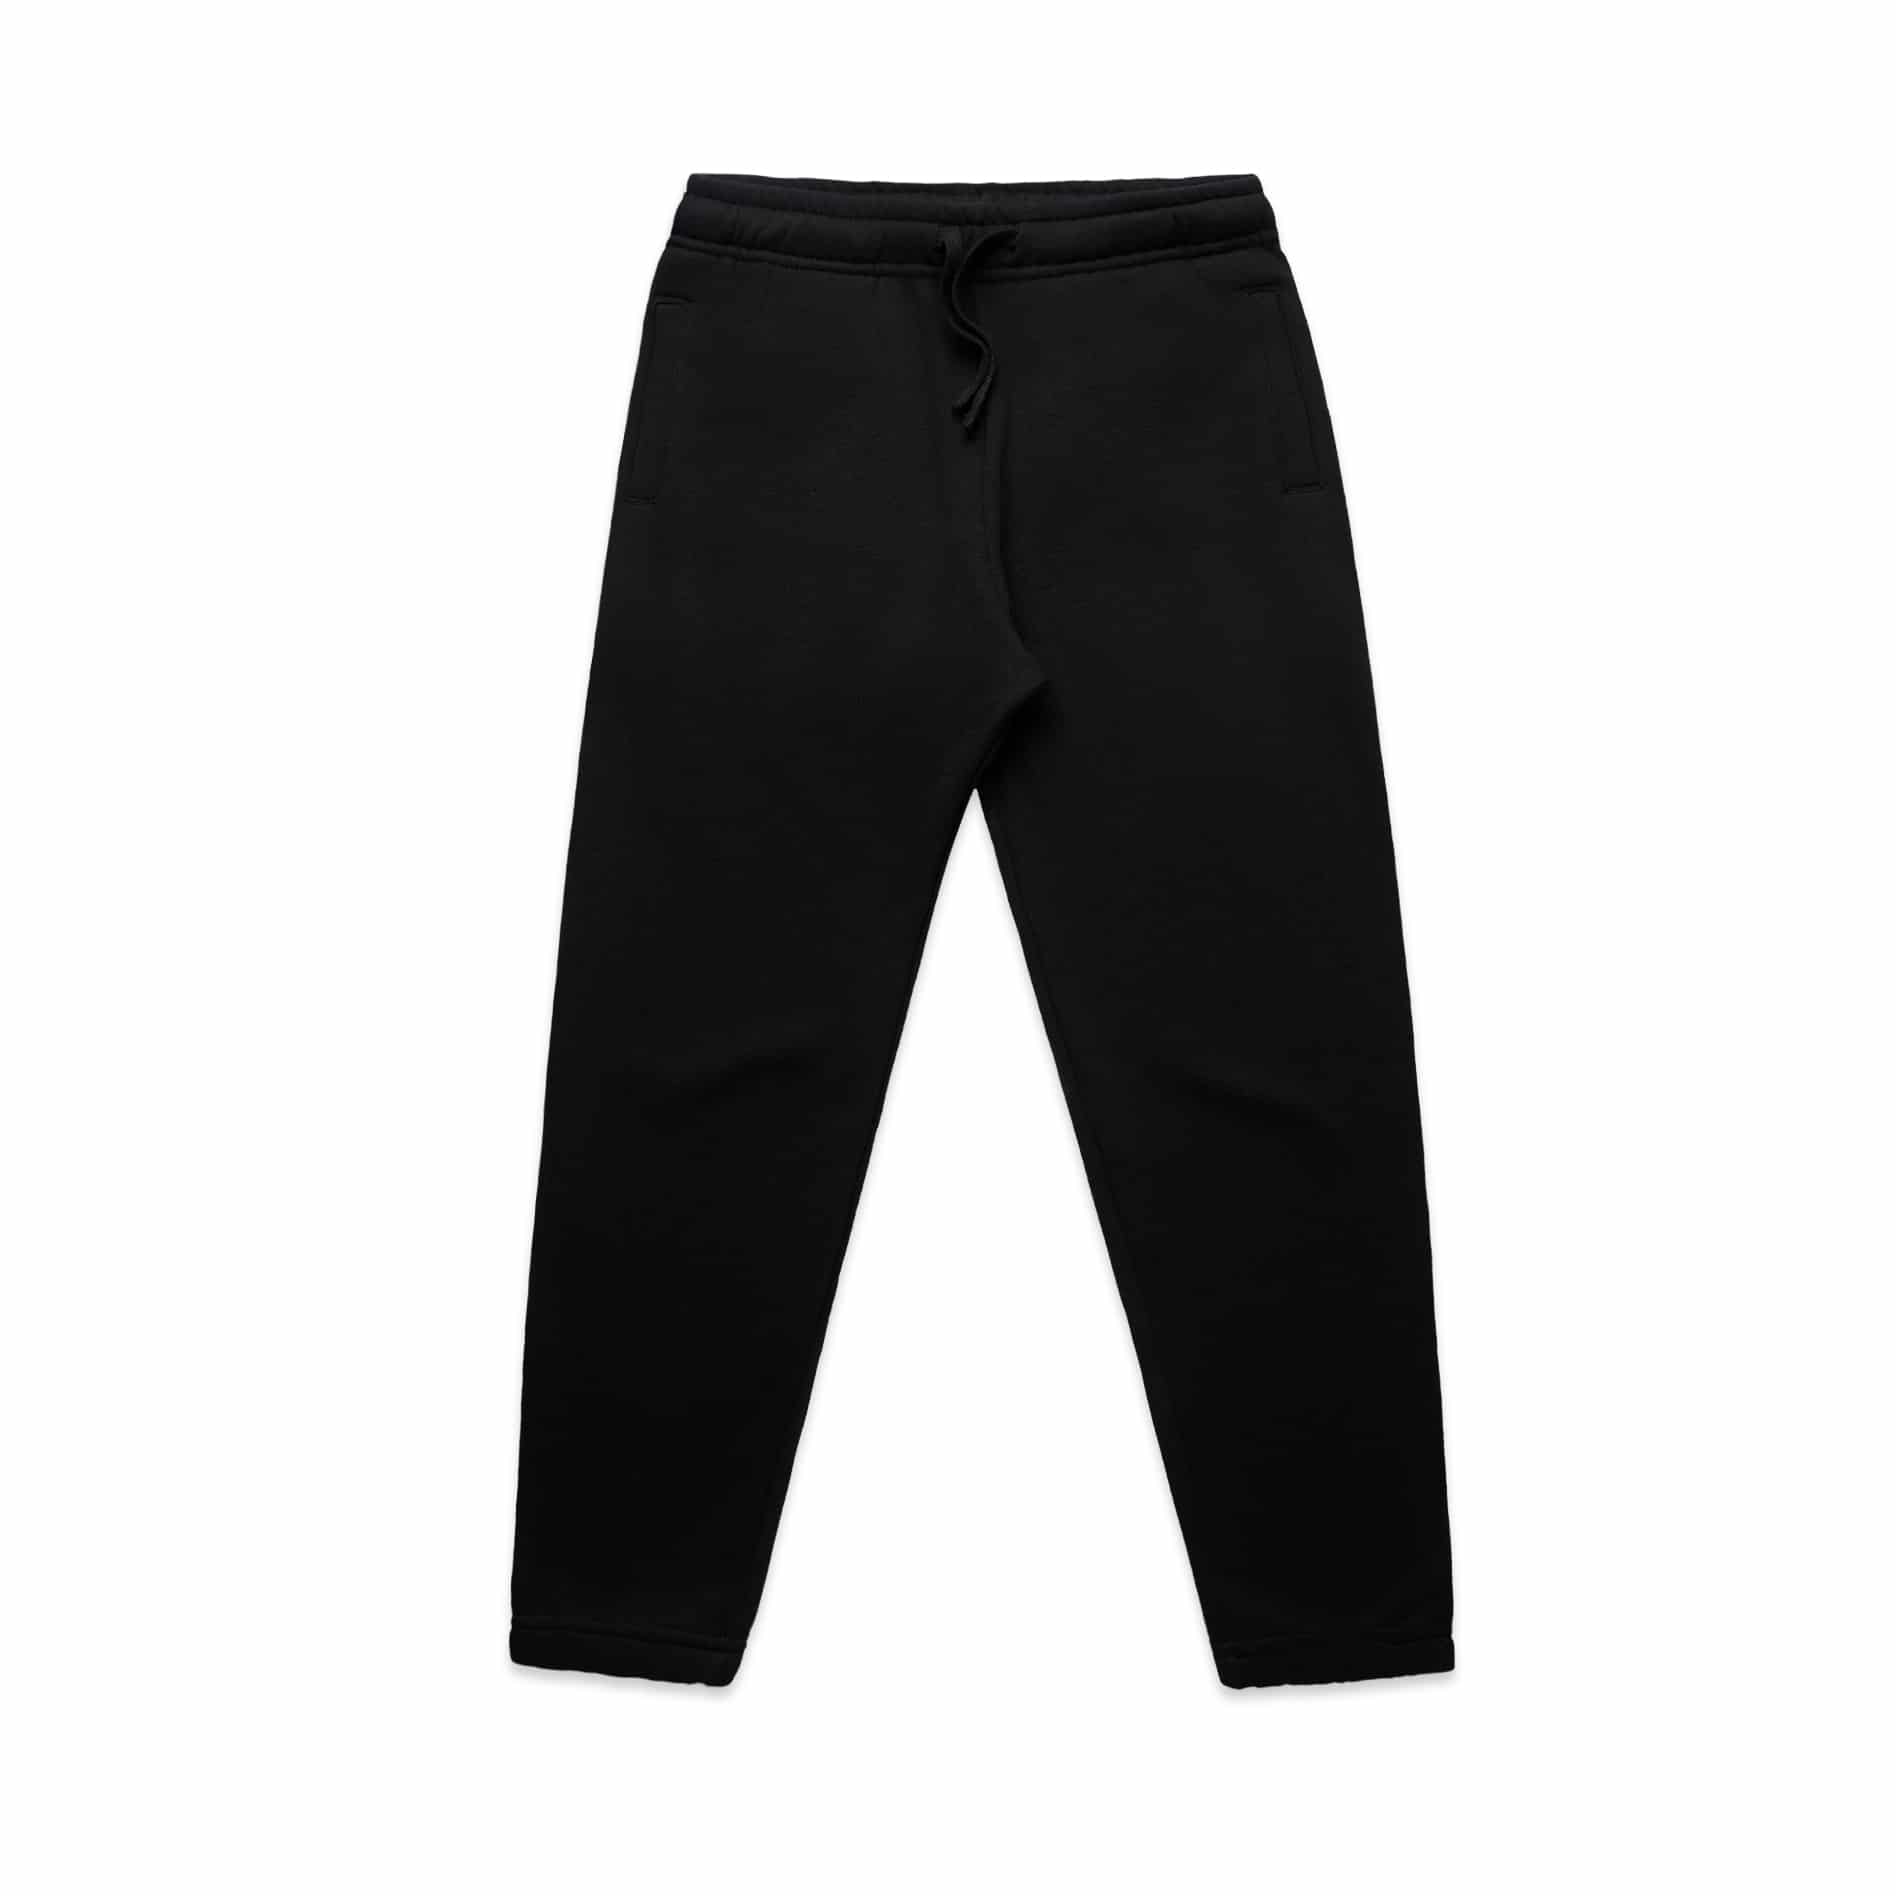 Auyz Men's Youth Boys Loose Fit Tear-Away Pants Snap Button Sports Running  Basketball Sweatpants, Black, XX-Small : Amazon.in: Clothing & Accessories